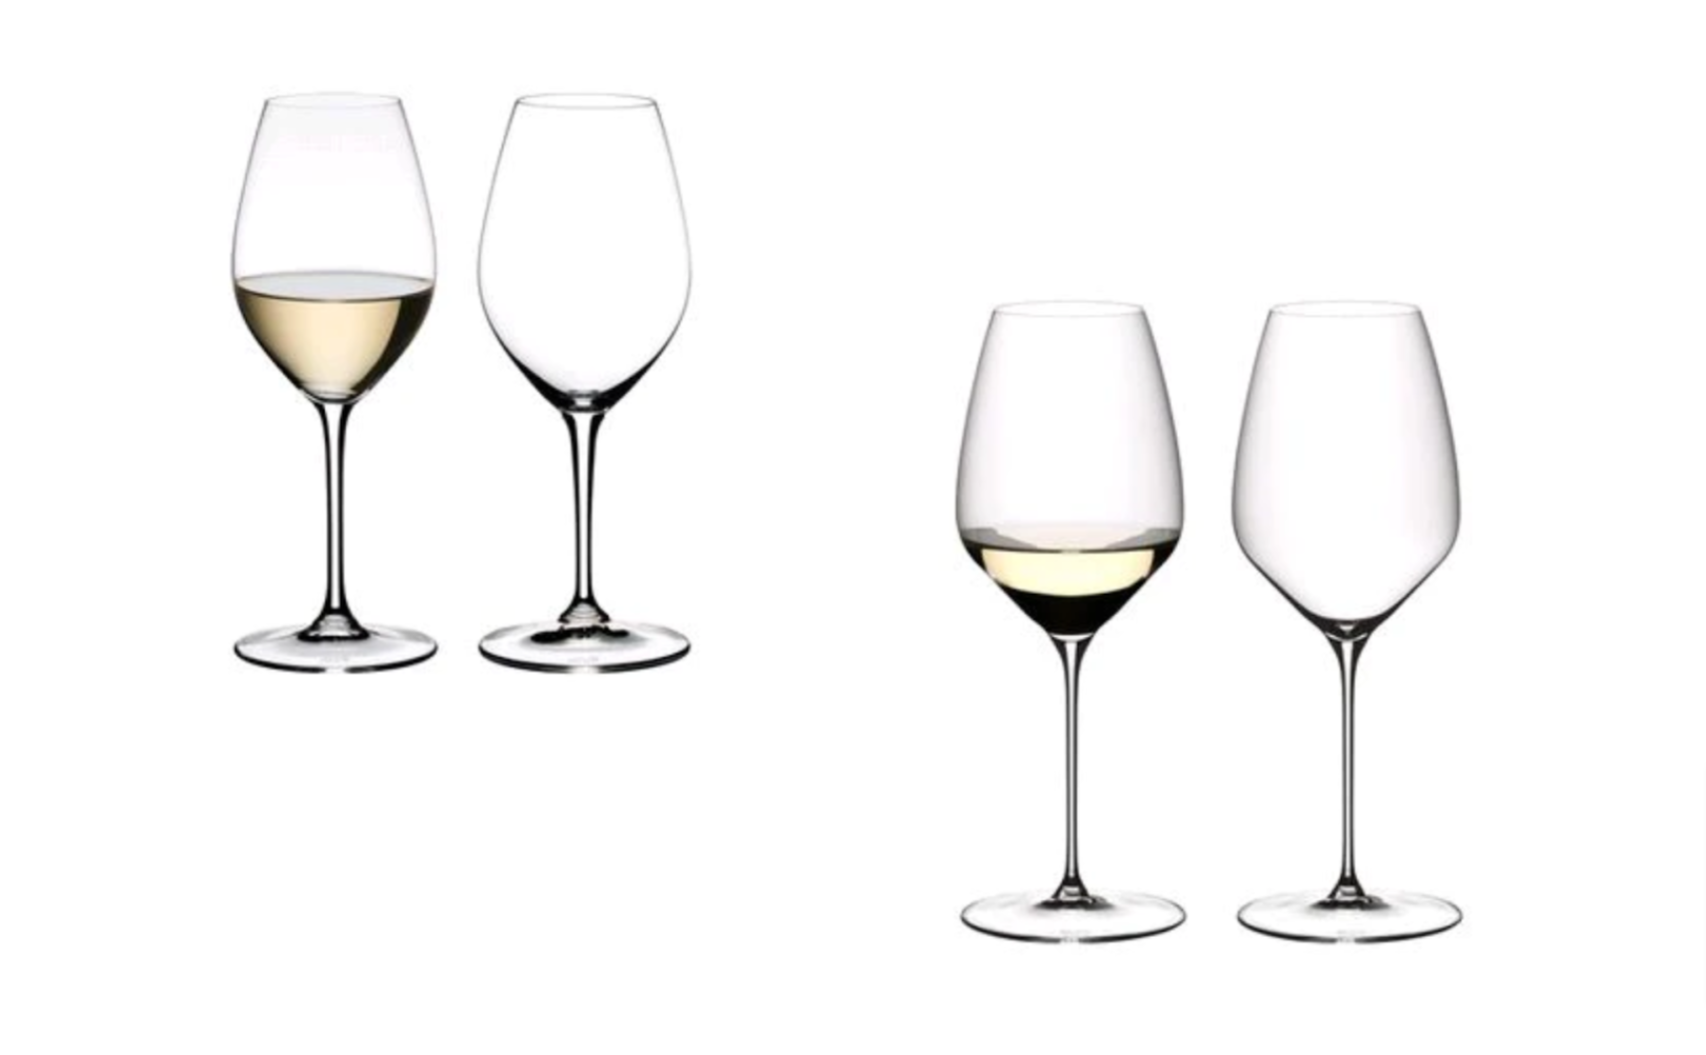 Riedel’s Wine Friendly White Wine Champagne Glasses and Veloce Riesling Glasses